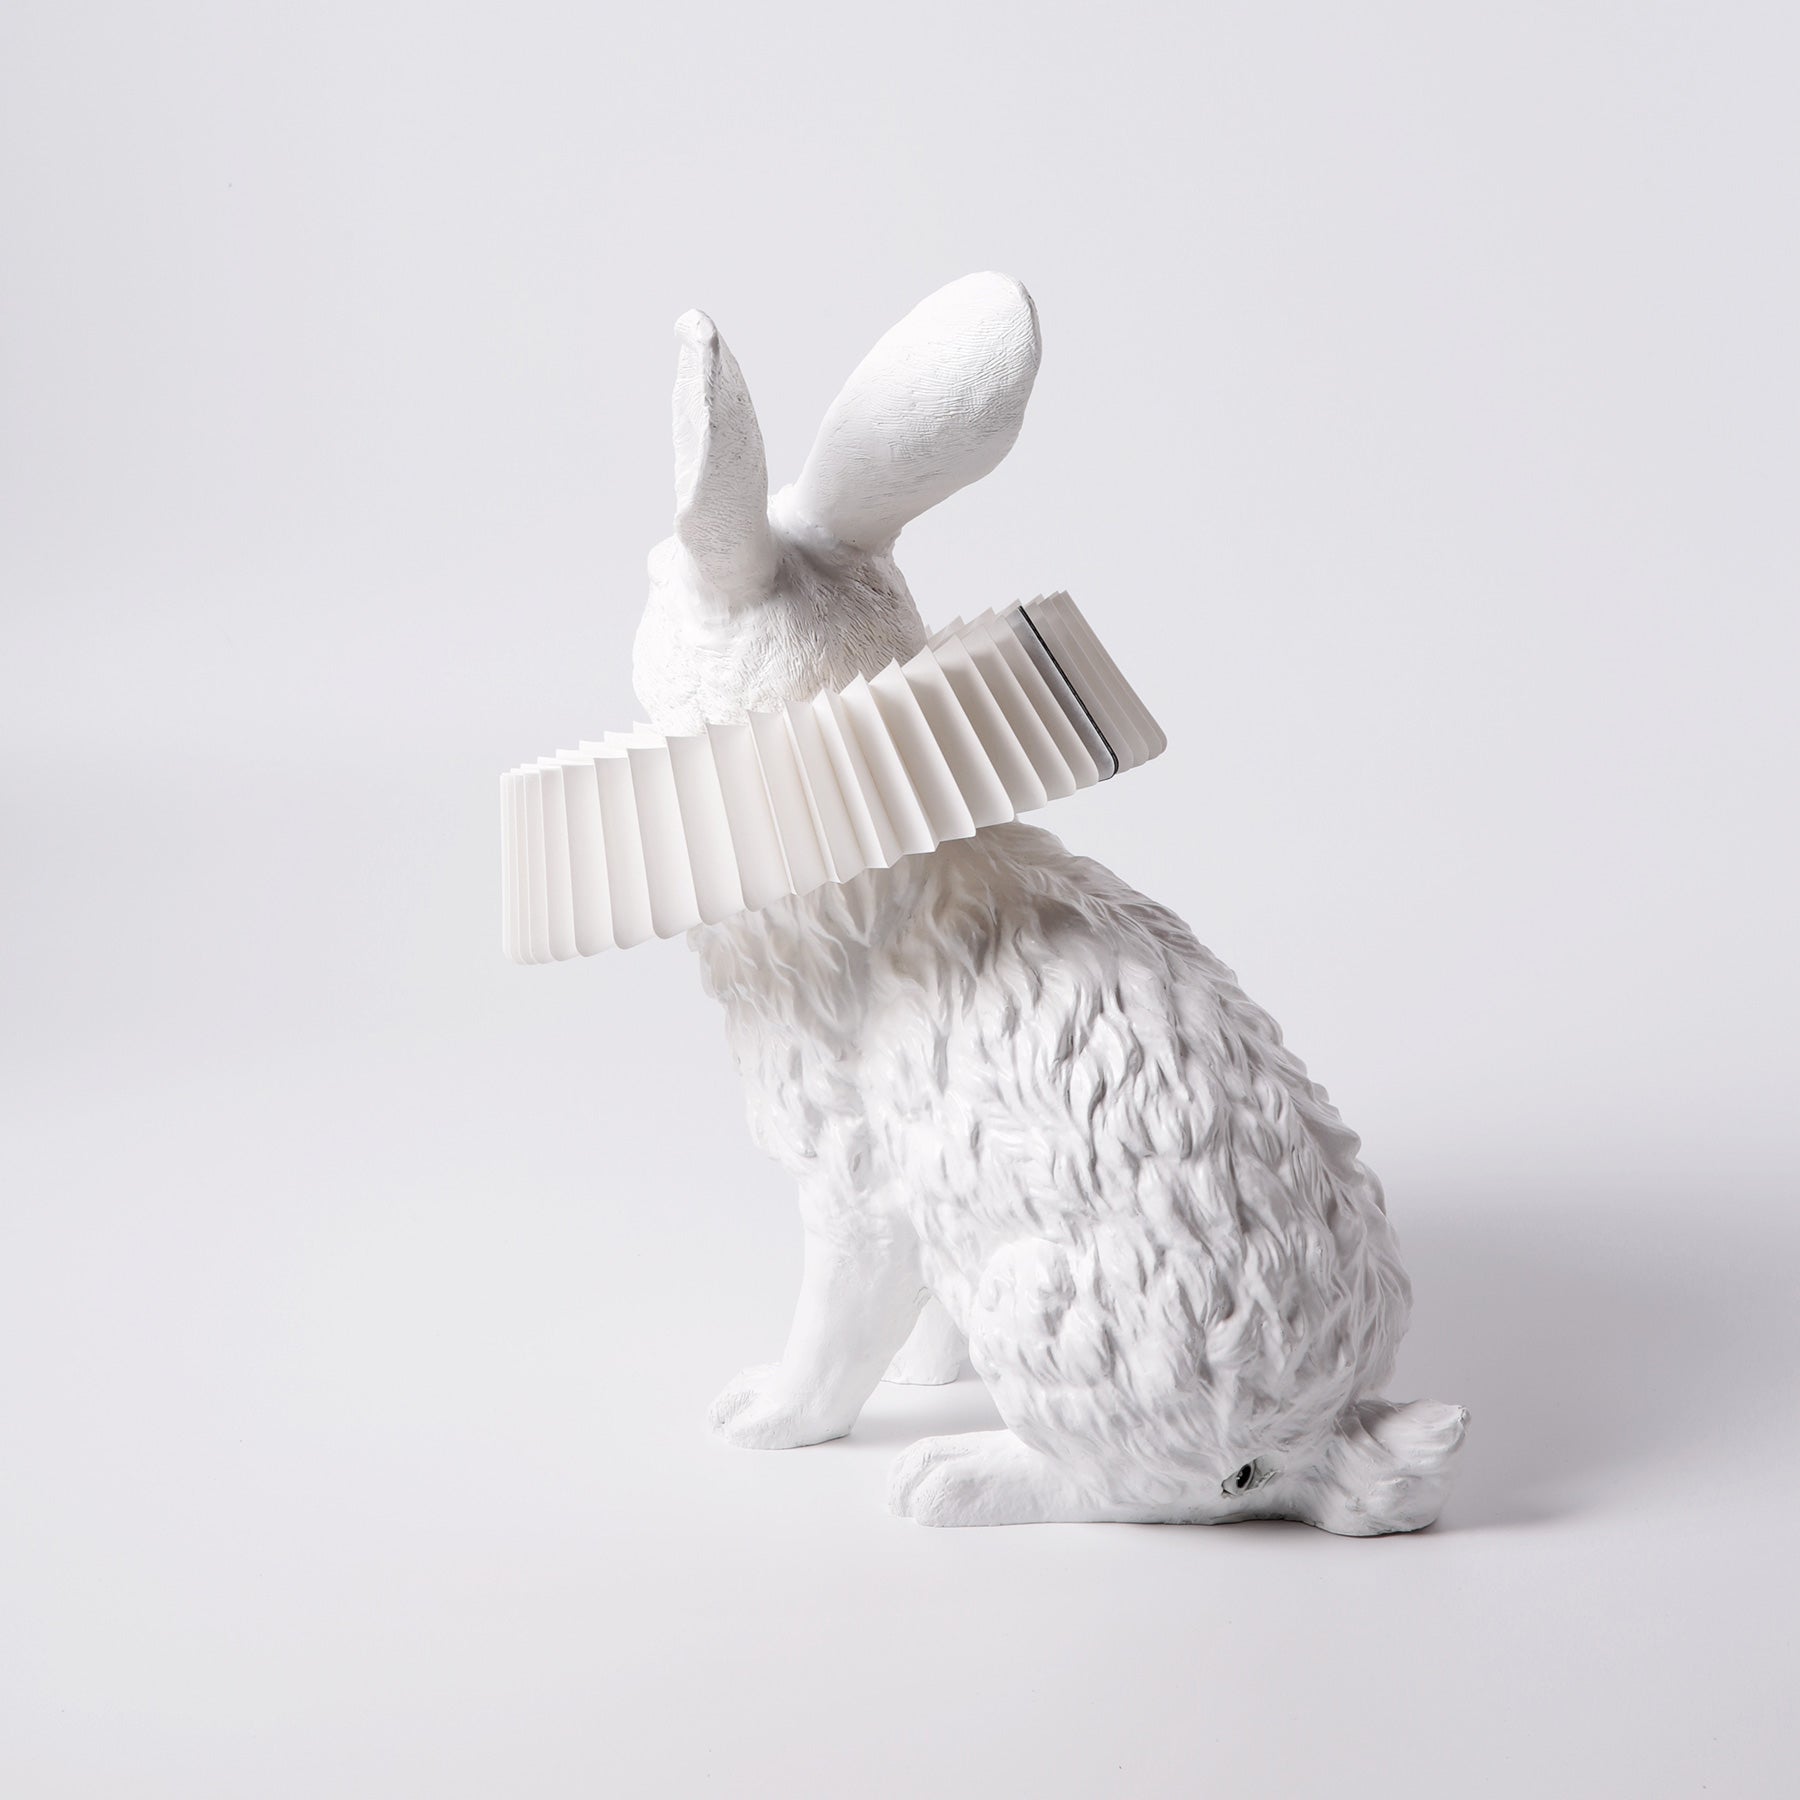 Christmas decorations will be perfect with adorable rabbit lamp